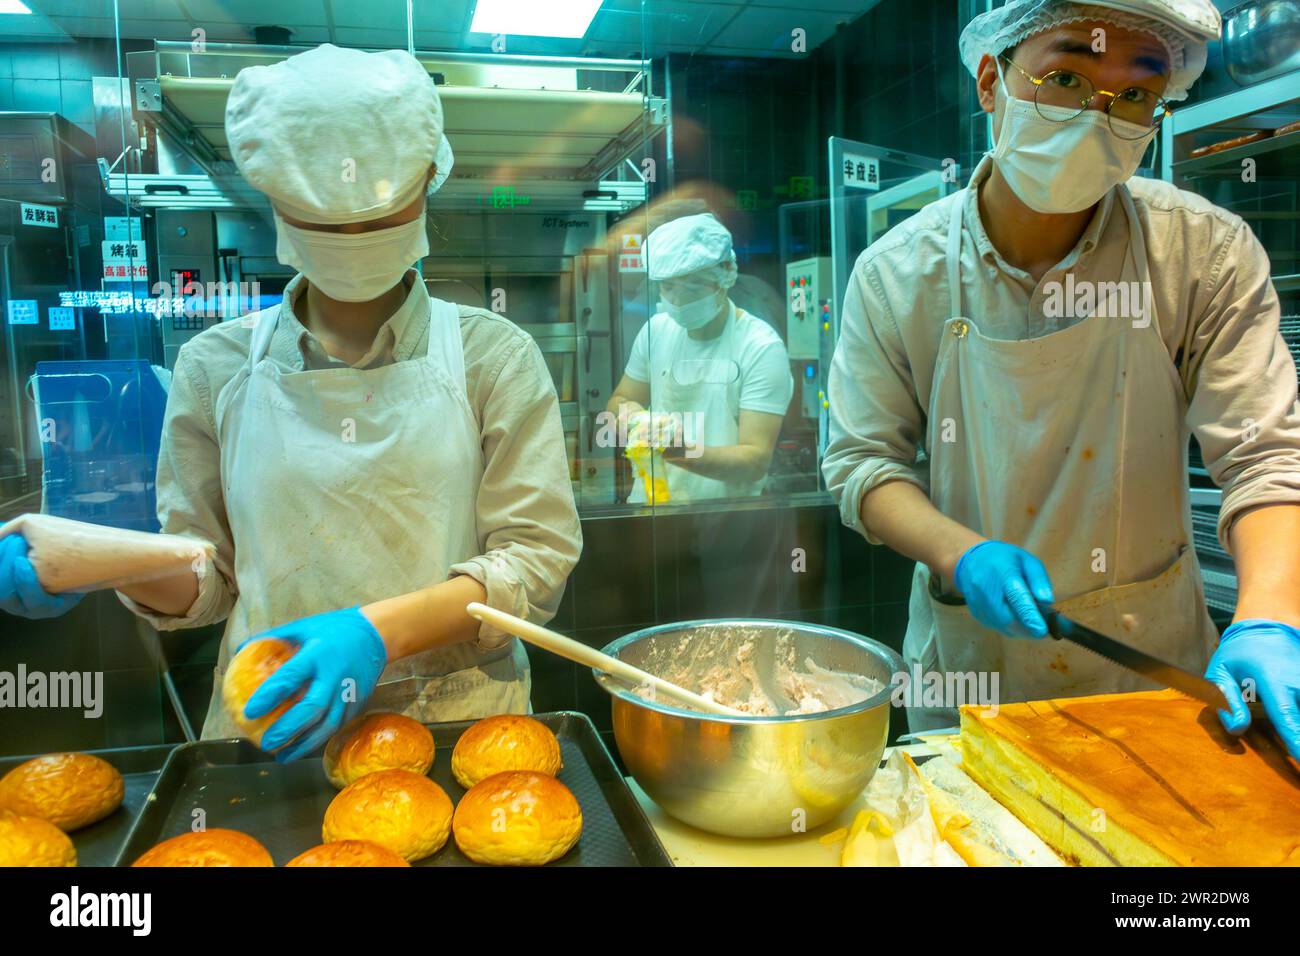 Chengdu, China, Sichuan, Small Group people, Chinese Teenagers, Chefs Working in Chinese Restaurant Kitchen, Chinese Teas Shop, « HeyTea Black » Stock Photo